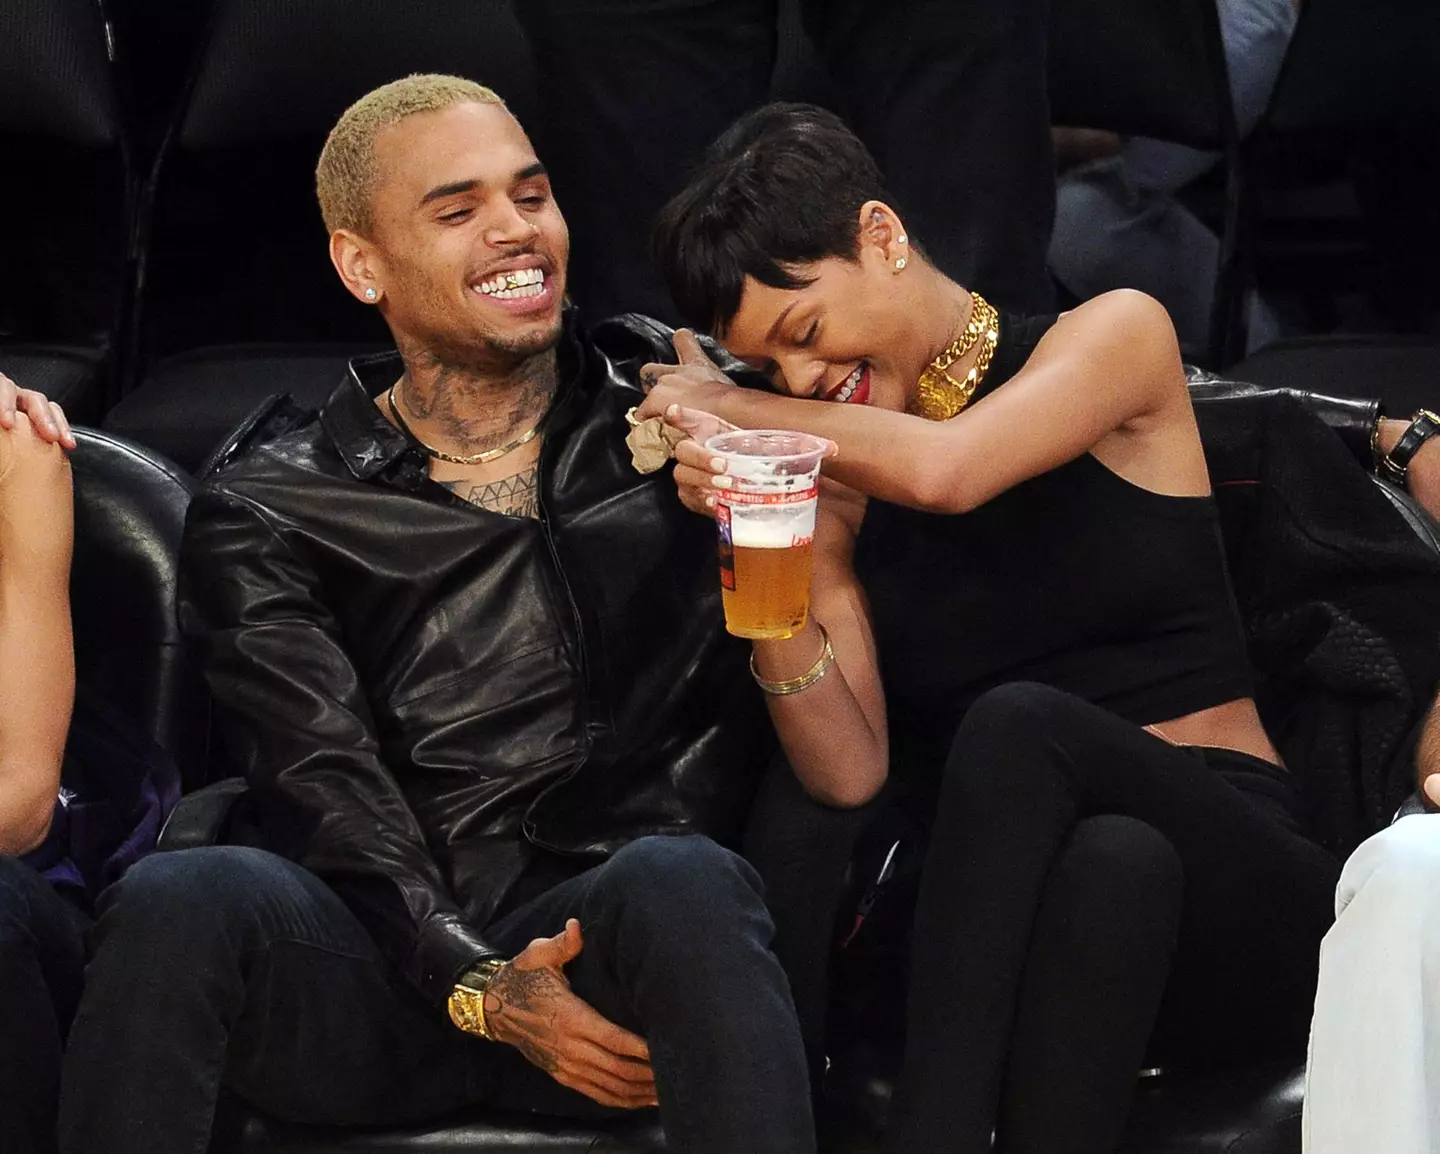 Rihanna was famously pictured laughing alongside ex-boyfriend Chris Brown at a LA Lakers game in 2012.